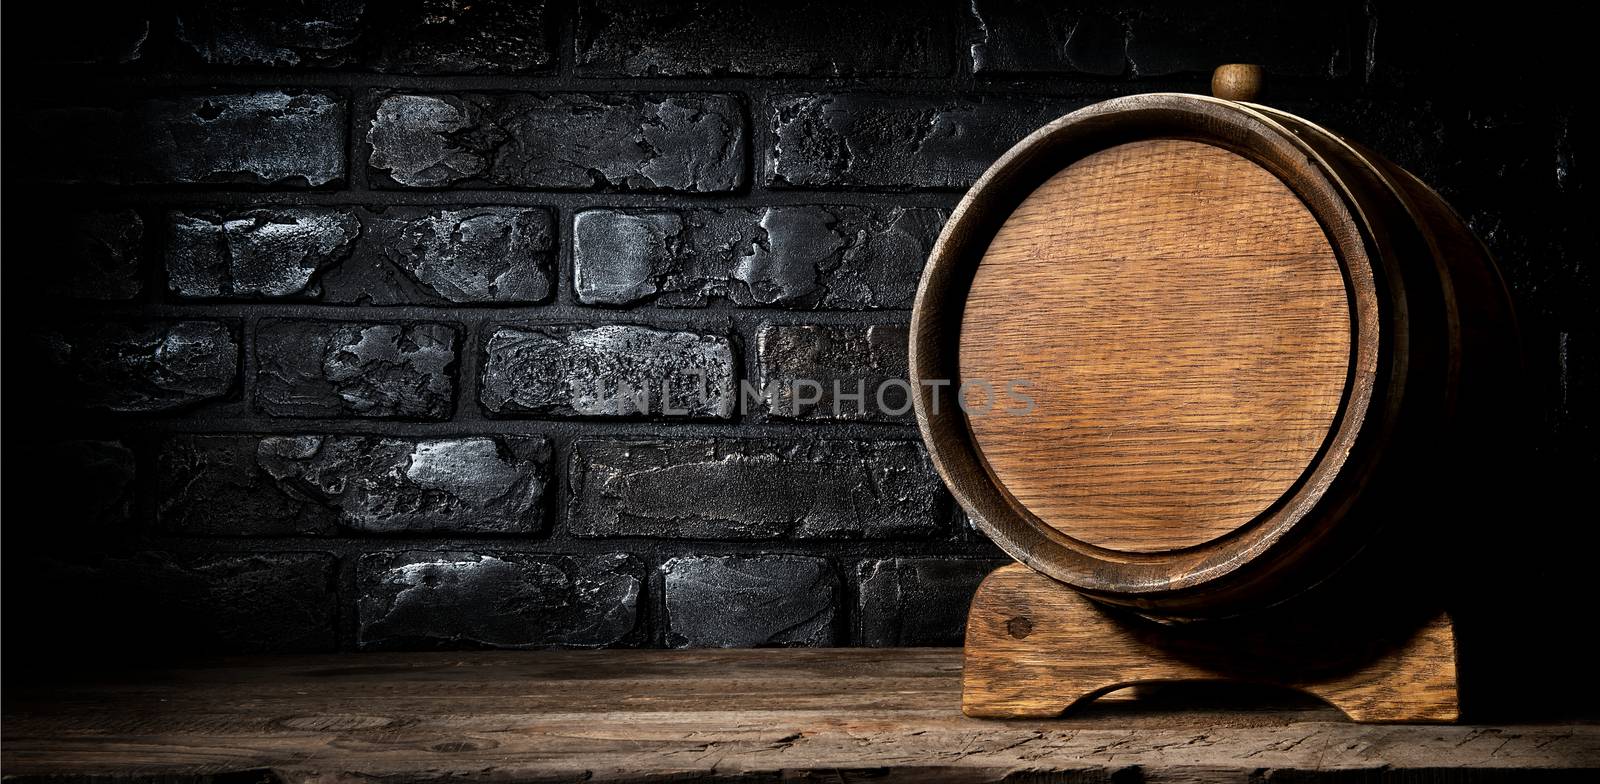 Wooden cask and bricks by Givaga